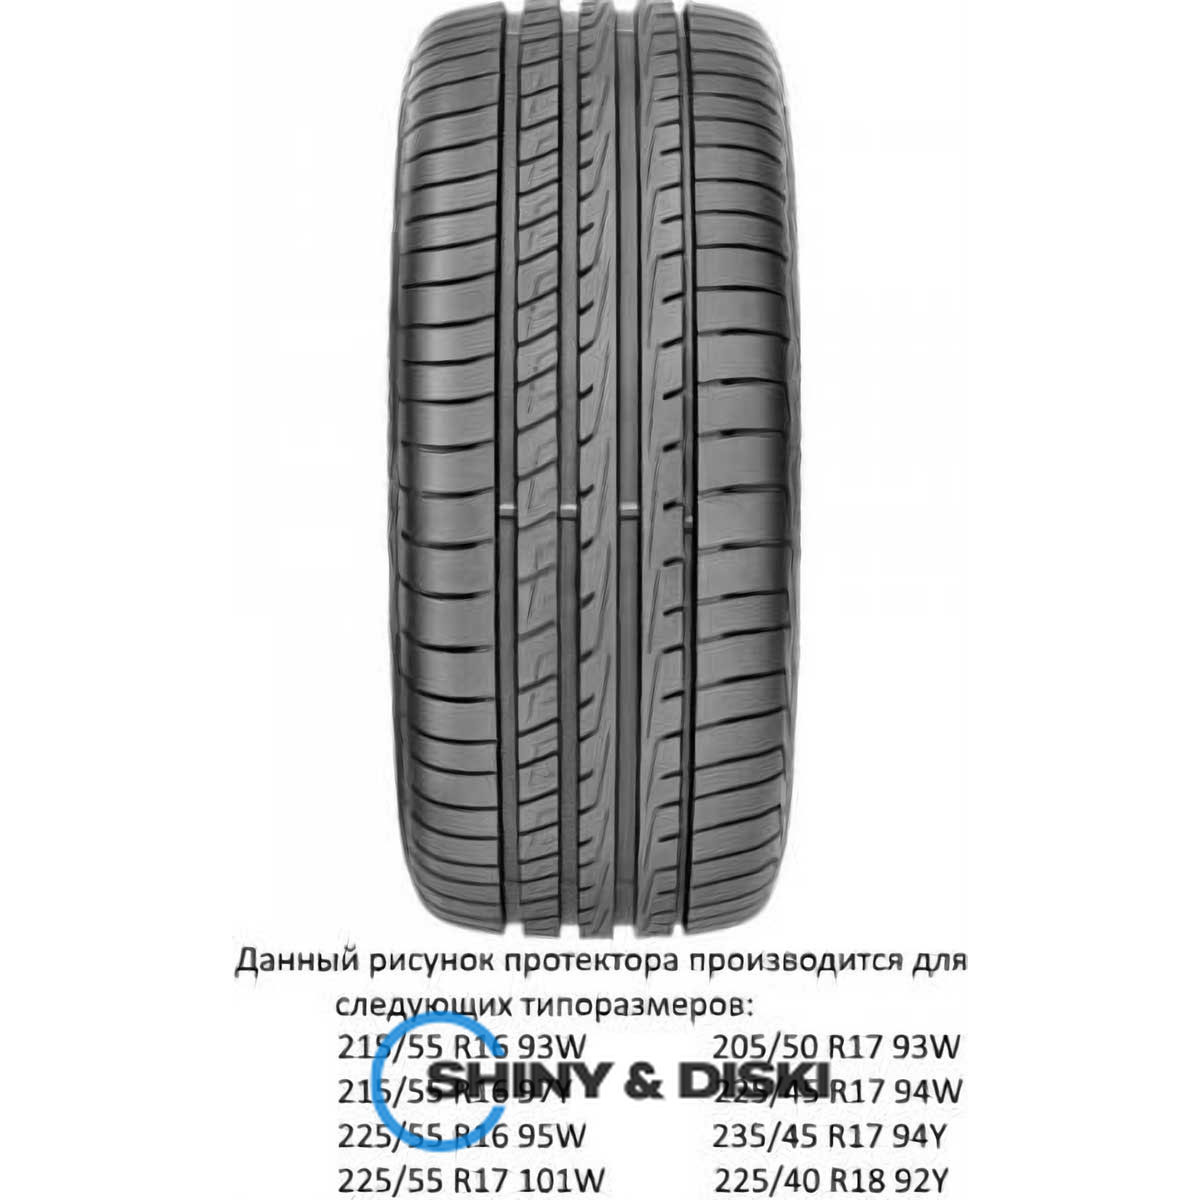 гума kelly uhp 225/55 r16 95w fp